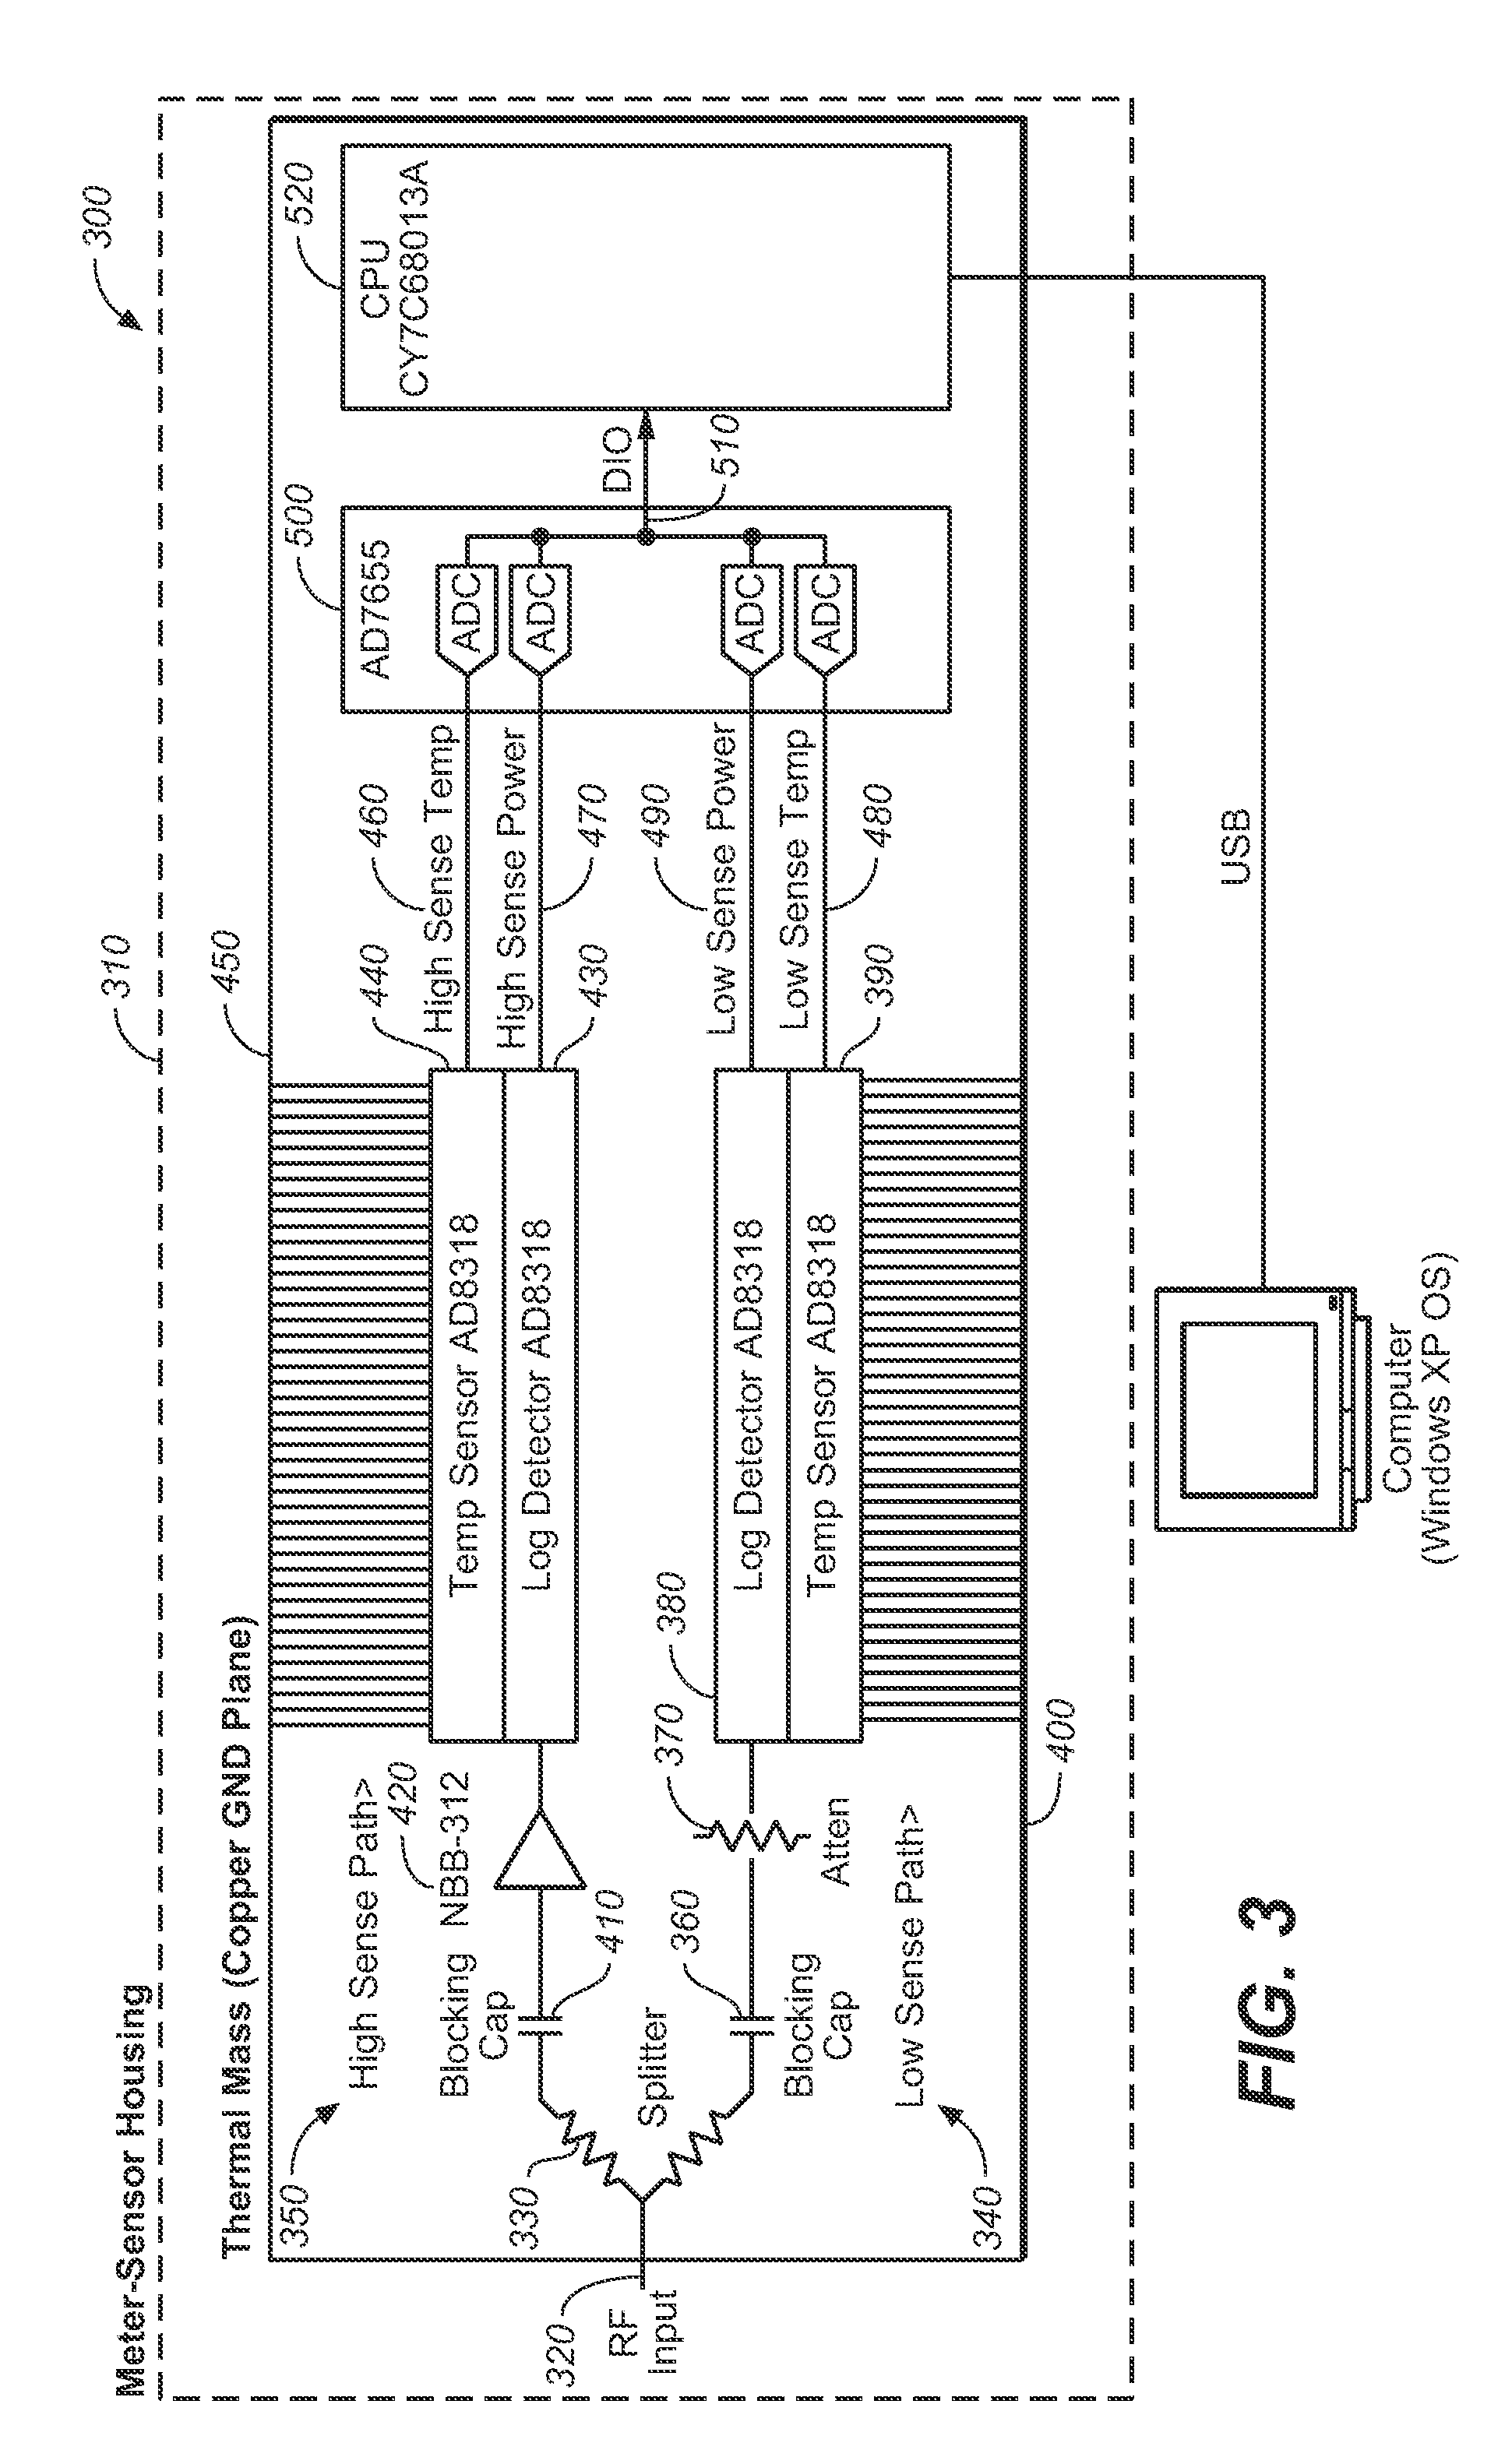 Method for eliminating the need to zero and calibrate a power meter before use